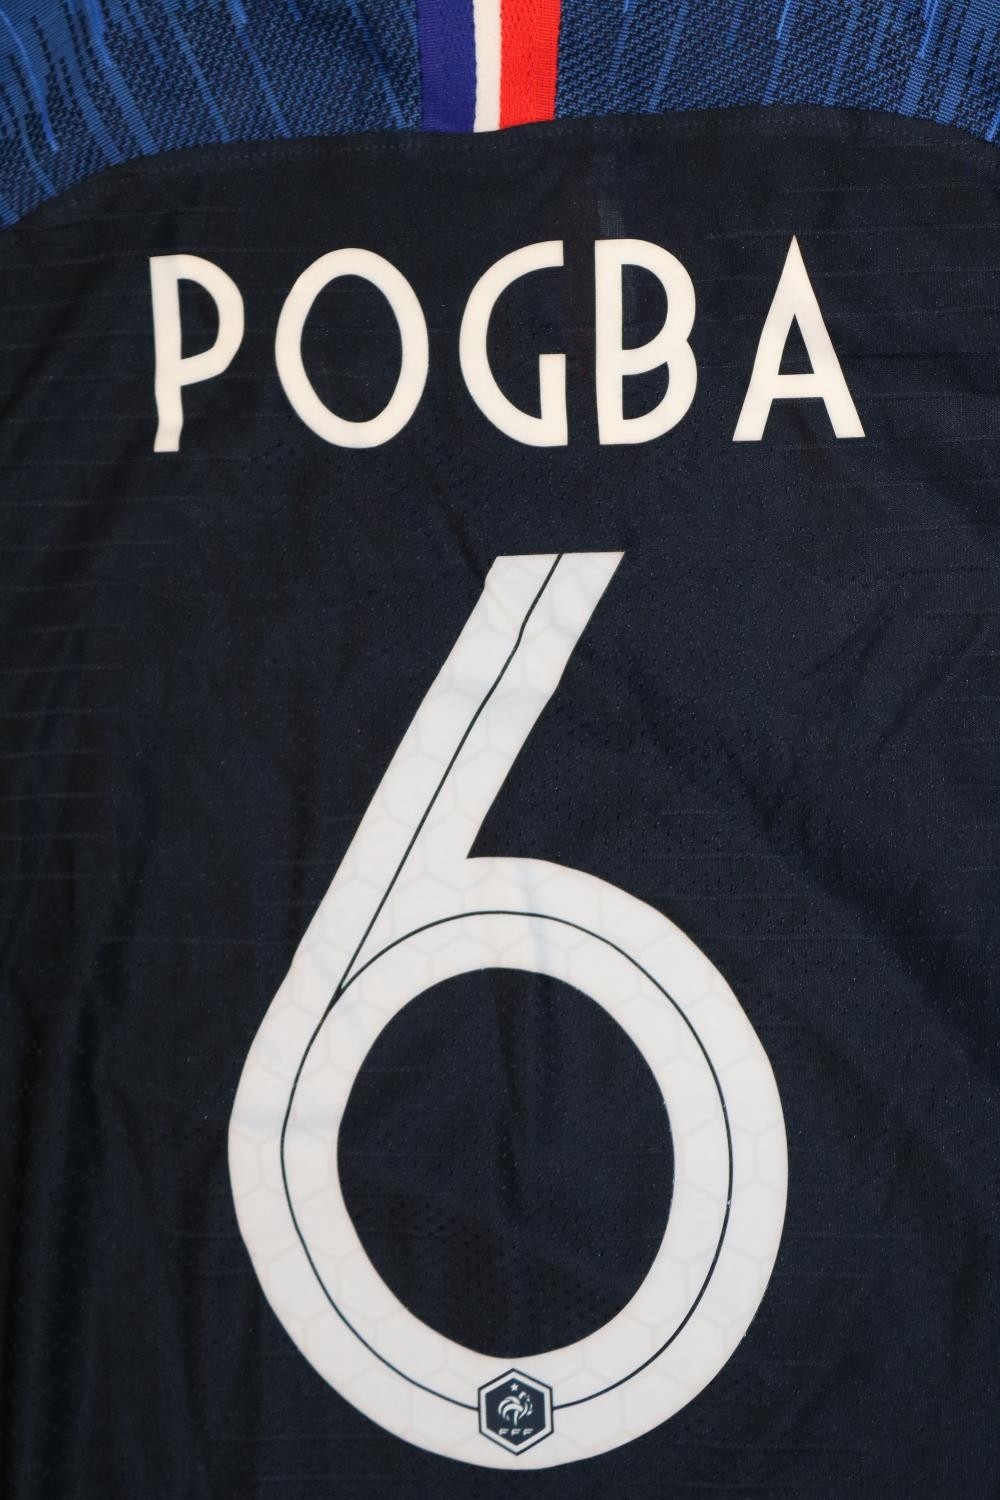 PAUL POGBA 2018 FIFA WORLD CUP FINAL MATCH ISSUED FRANCE JERSEY The 2018 FIFA World Cup final was - Image 2 of 5